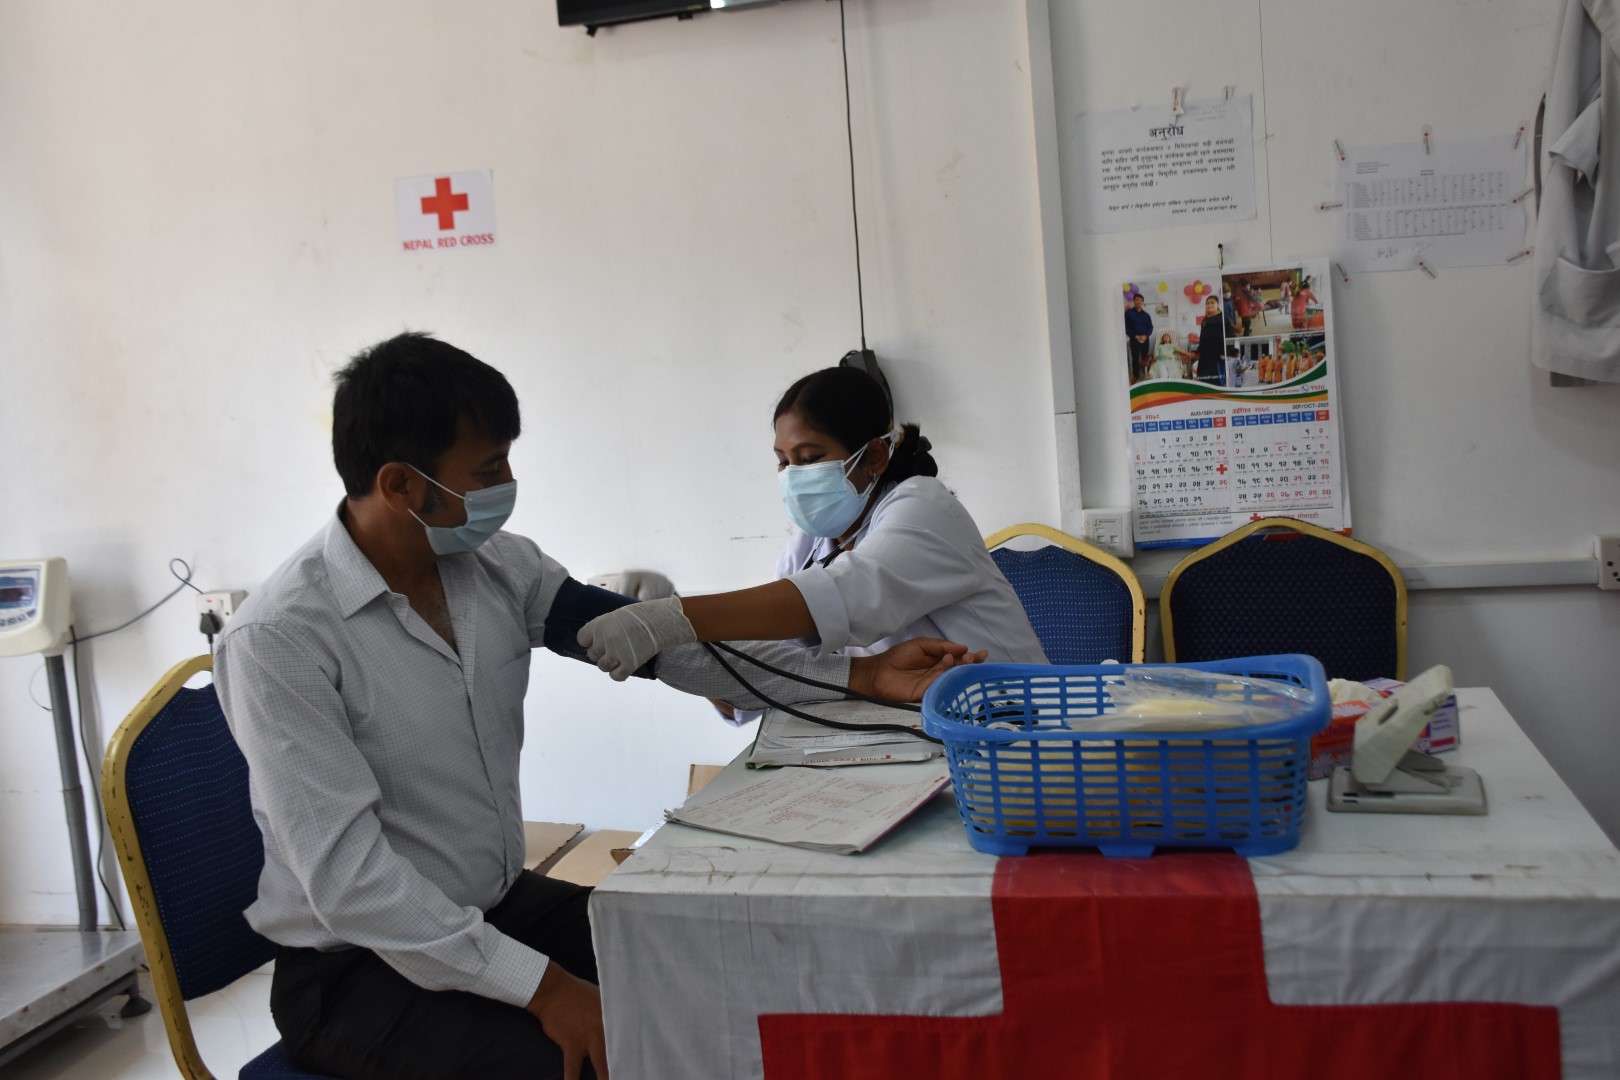 Blood Donation Program Organized Jointly by NU & NRCS